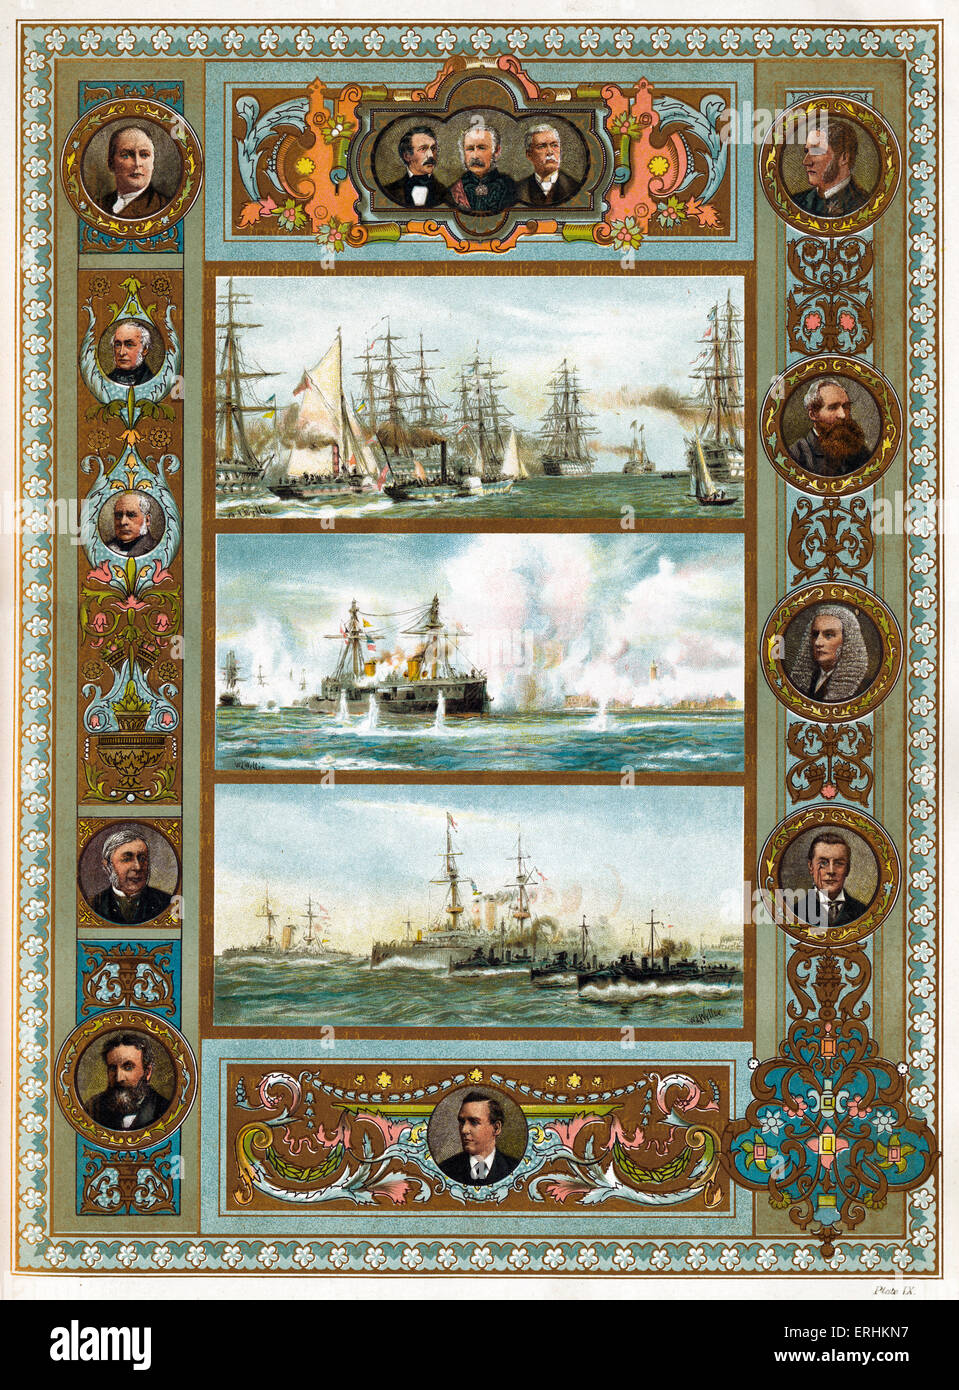 The Navy in the Victorian era - Naval Review at Spithead, 1855 (top), Bombardment of Alexandria, Egyptian War, 1882 (middle), Stock Photo